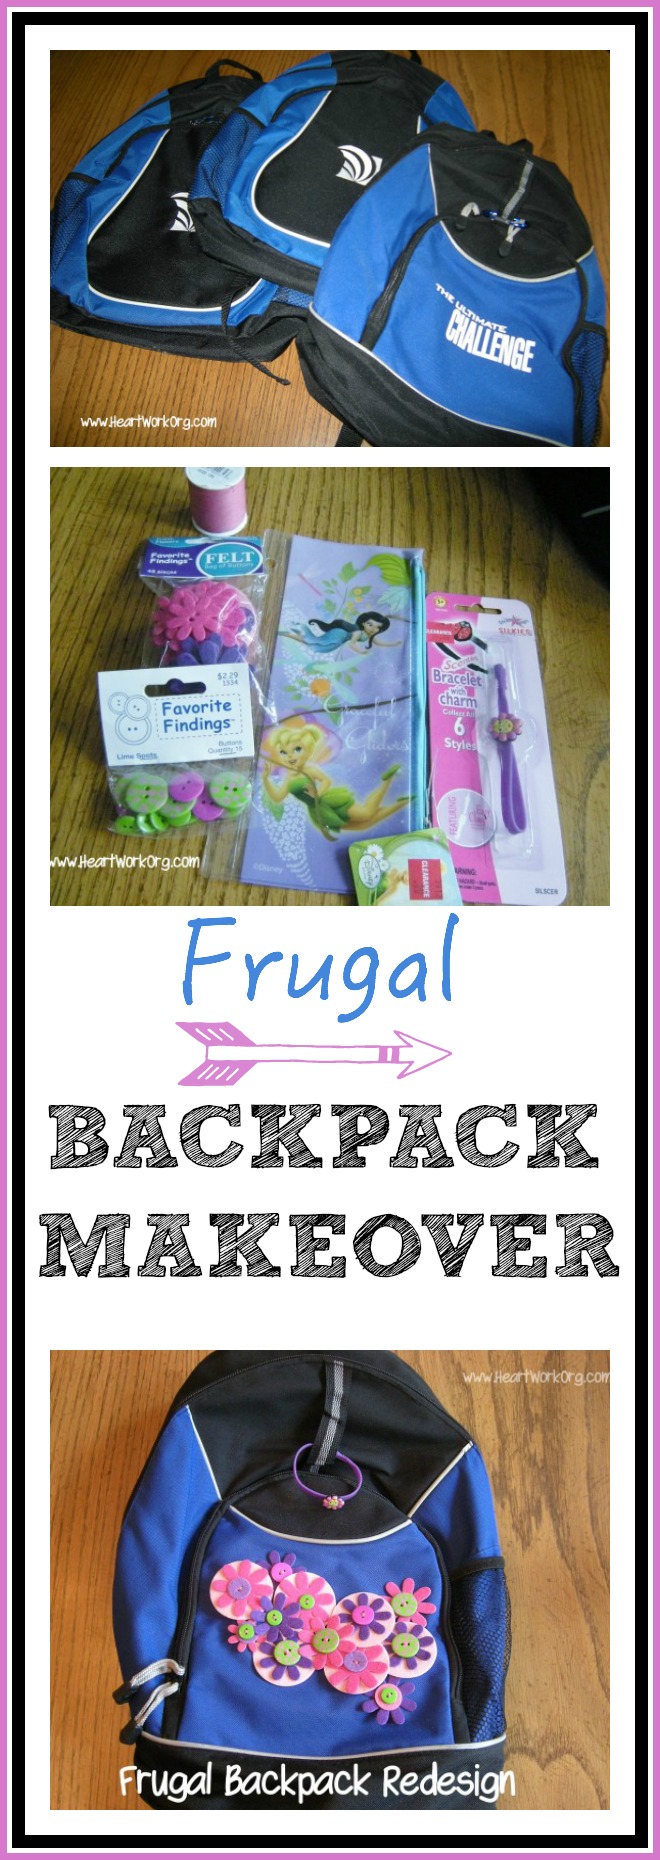 Frugal Backpack Makeover by HomeWork Organizing - Guest Post at The Everyday Home